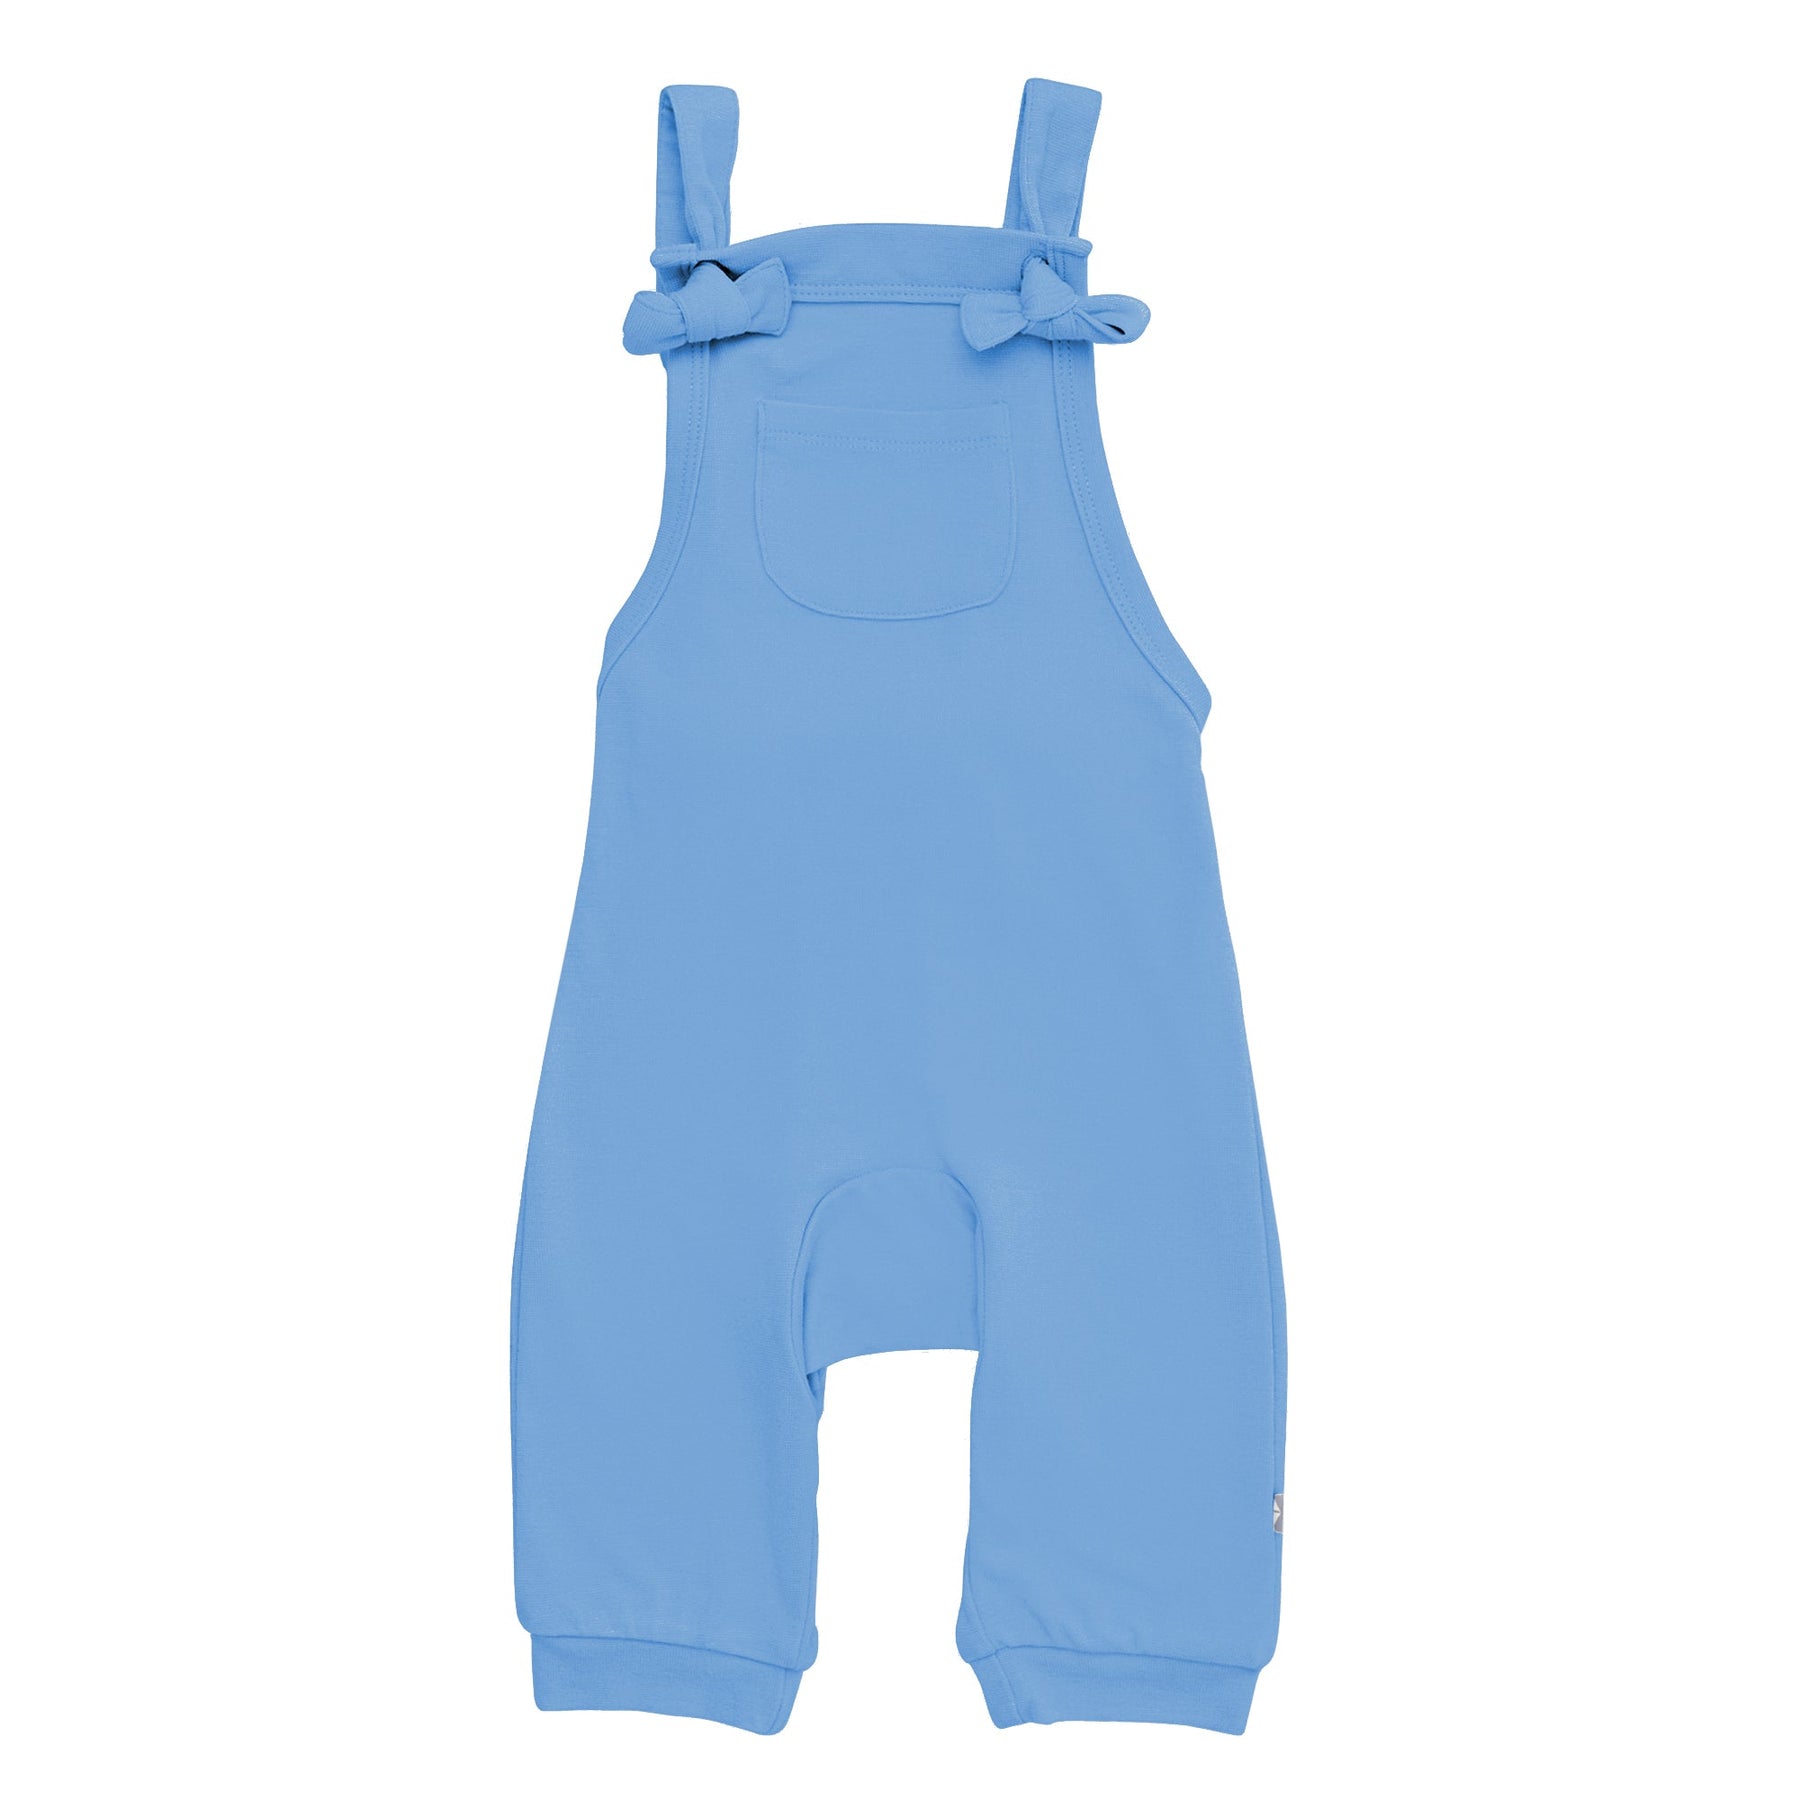 Kyte BABY Baby Overall Bamboo Jersey Overall in Periwinkle